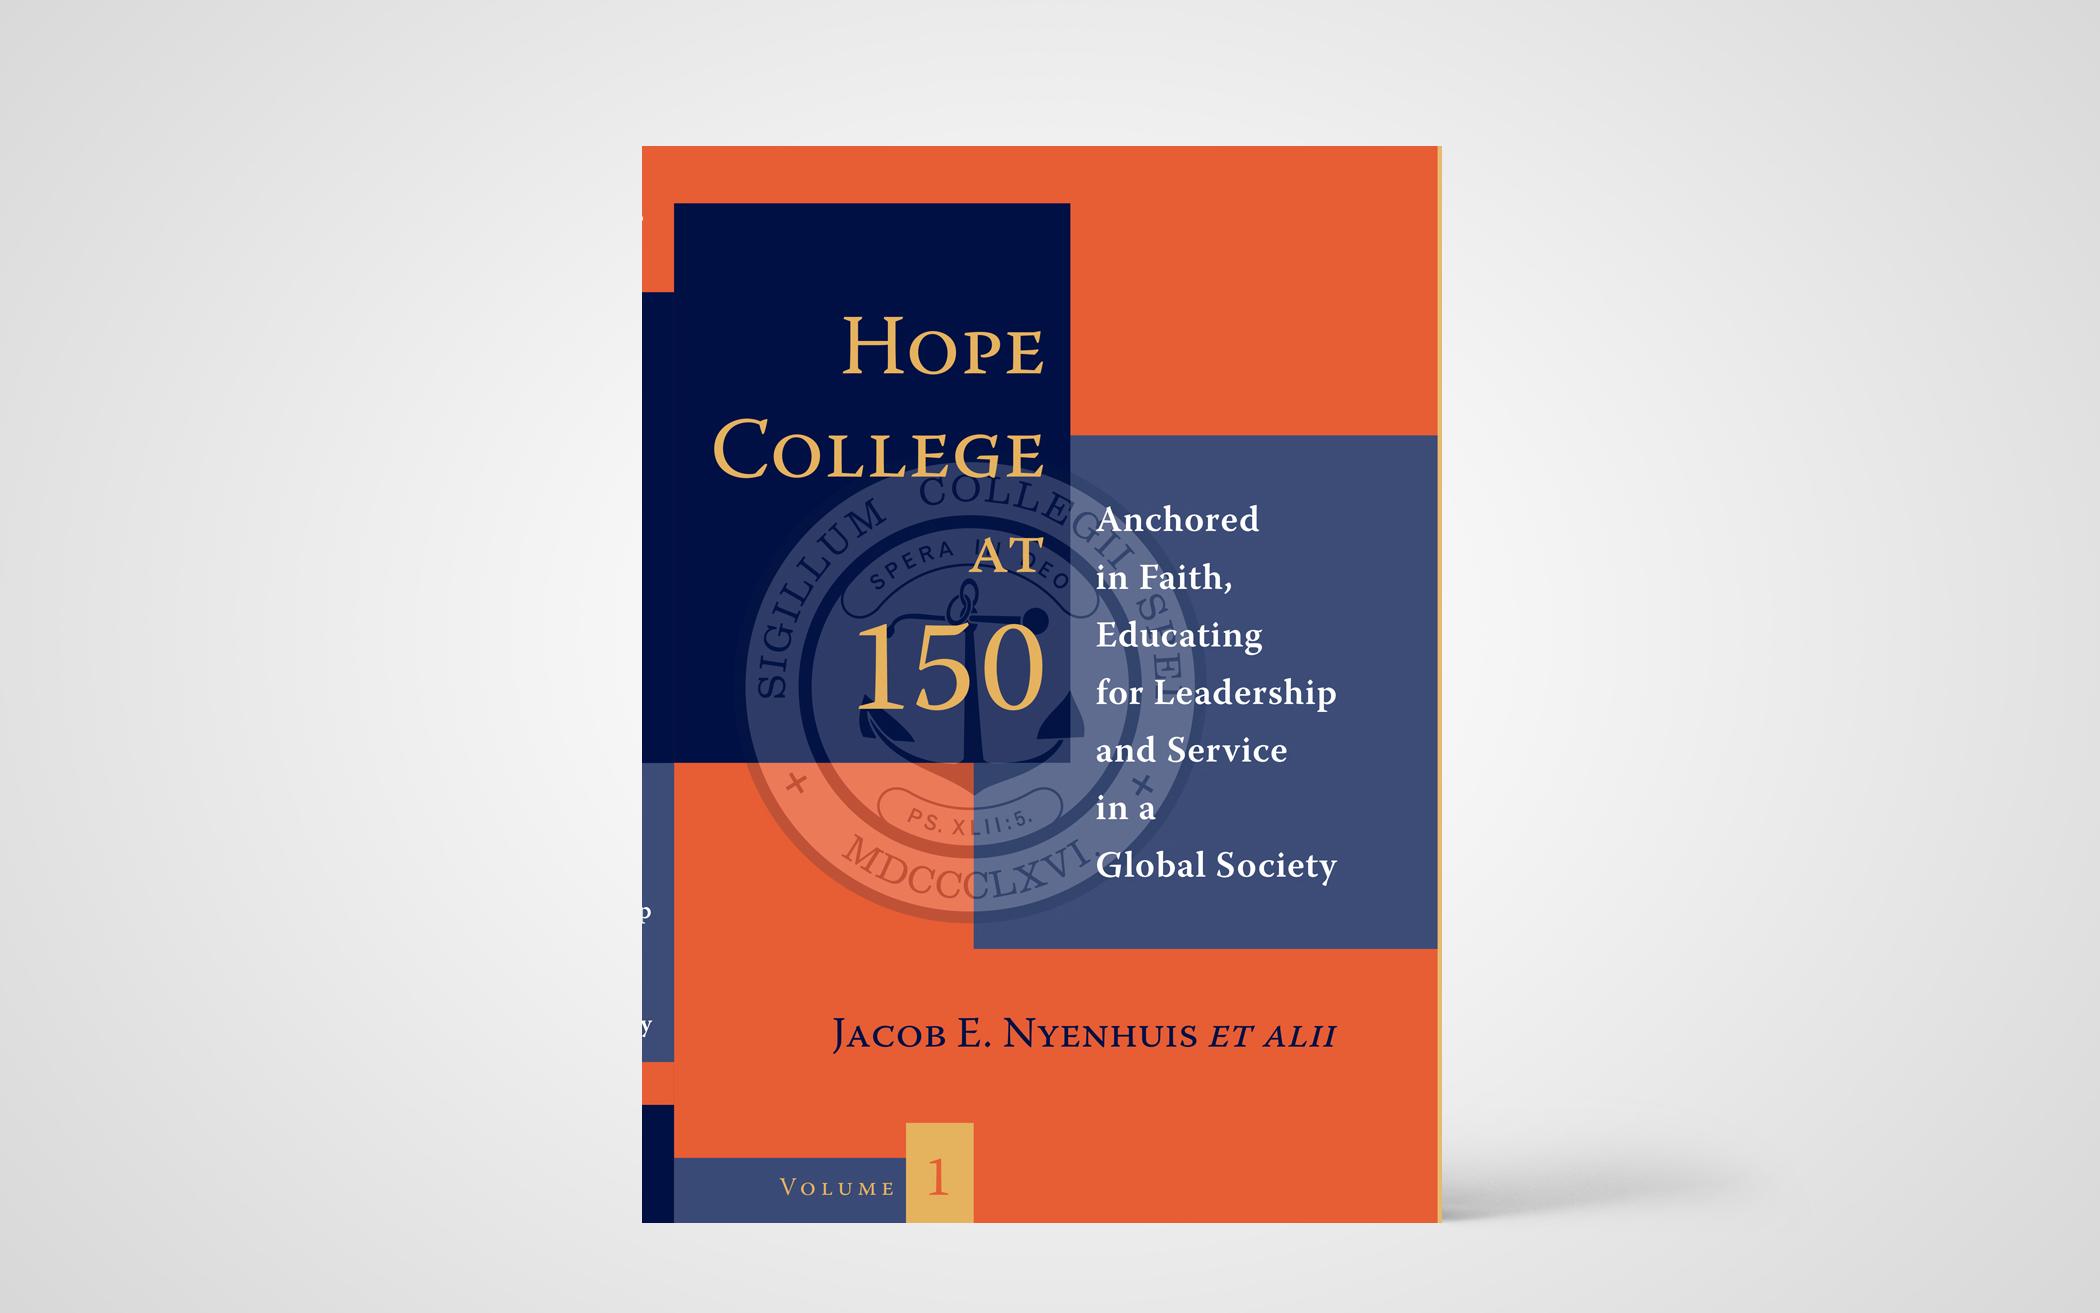 Hope College at 150 Anchored in Faith, Educating for Leadership and